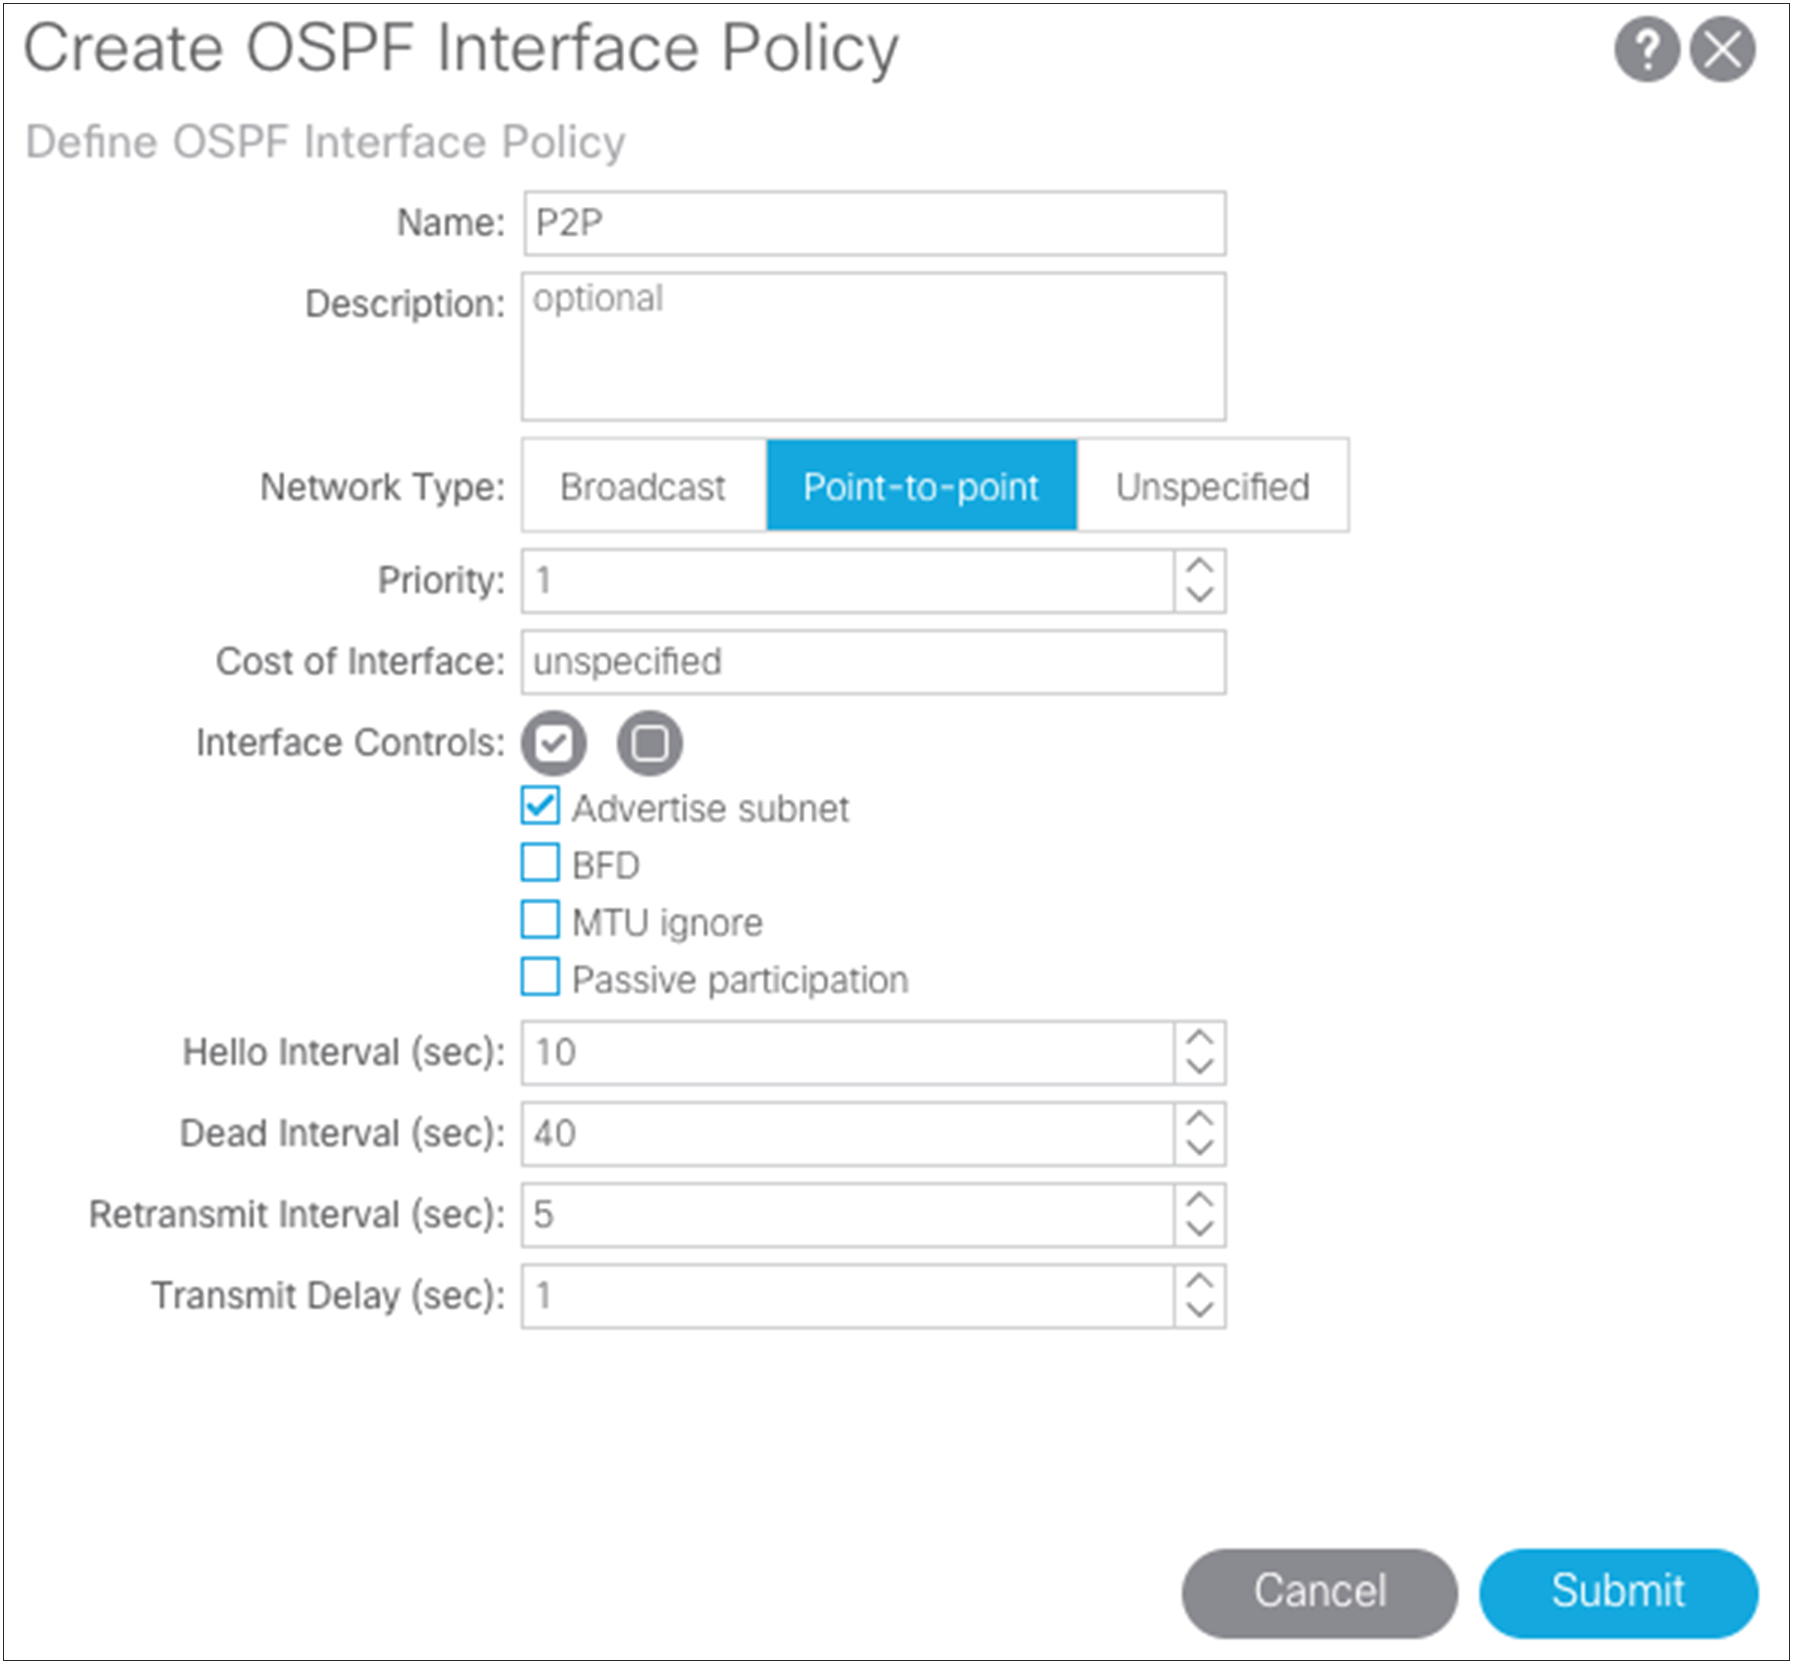 Create OSPF Interface Policy